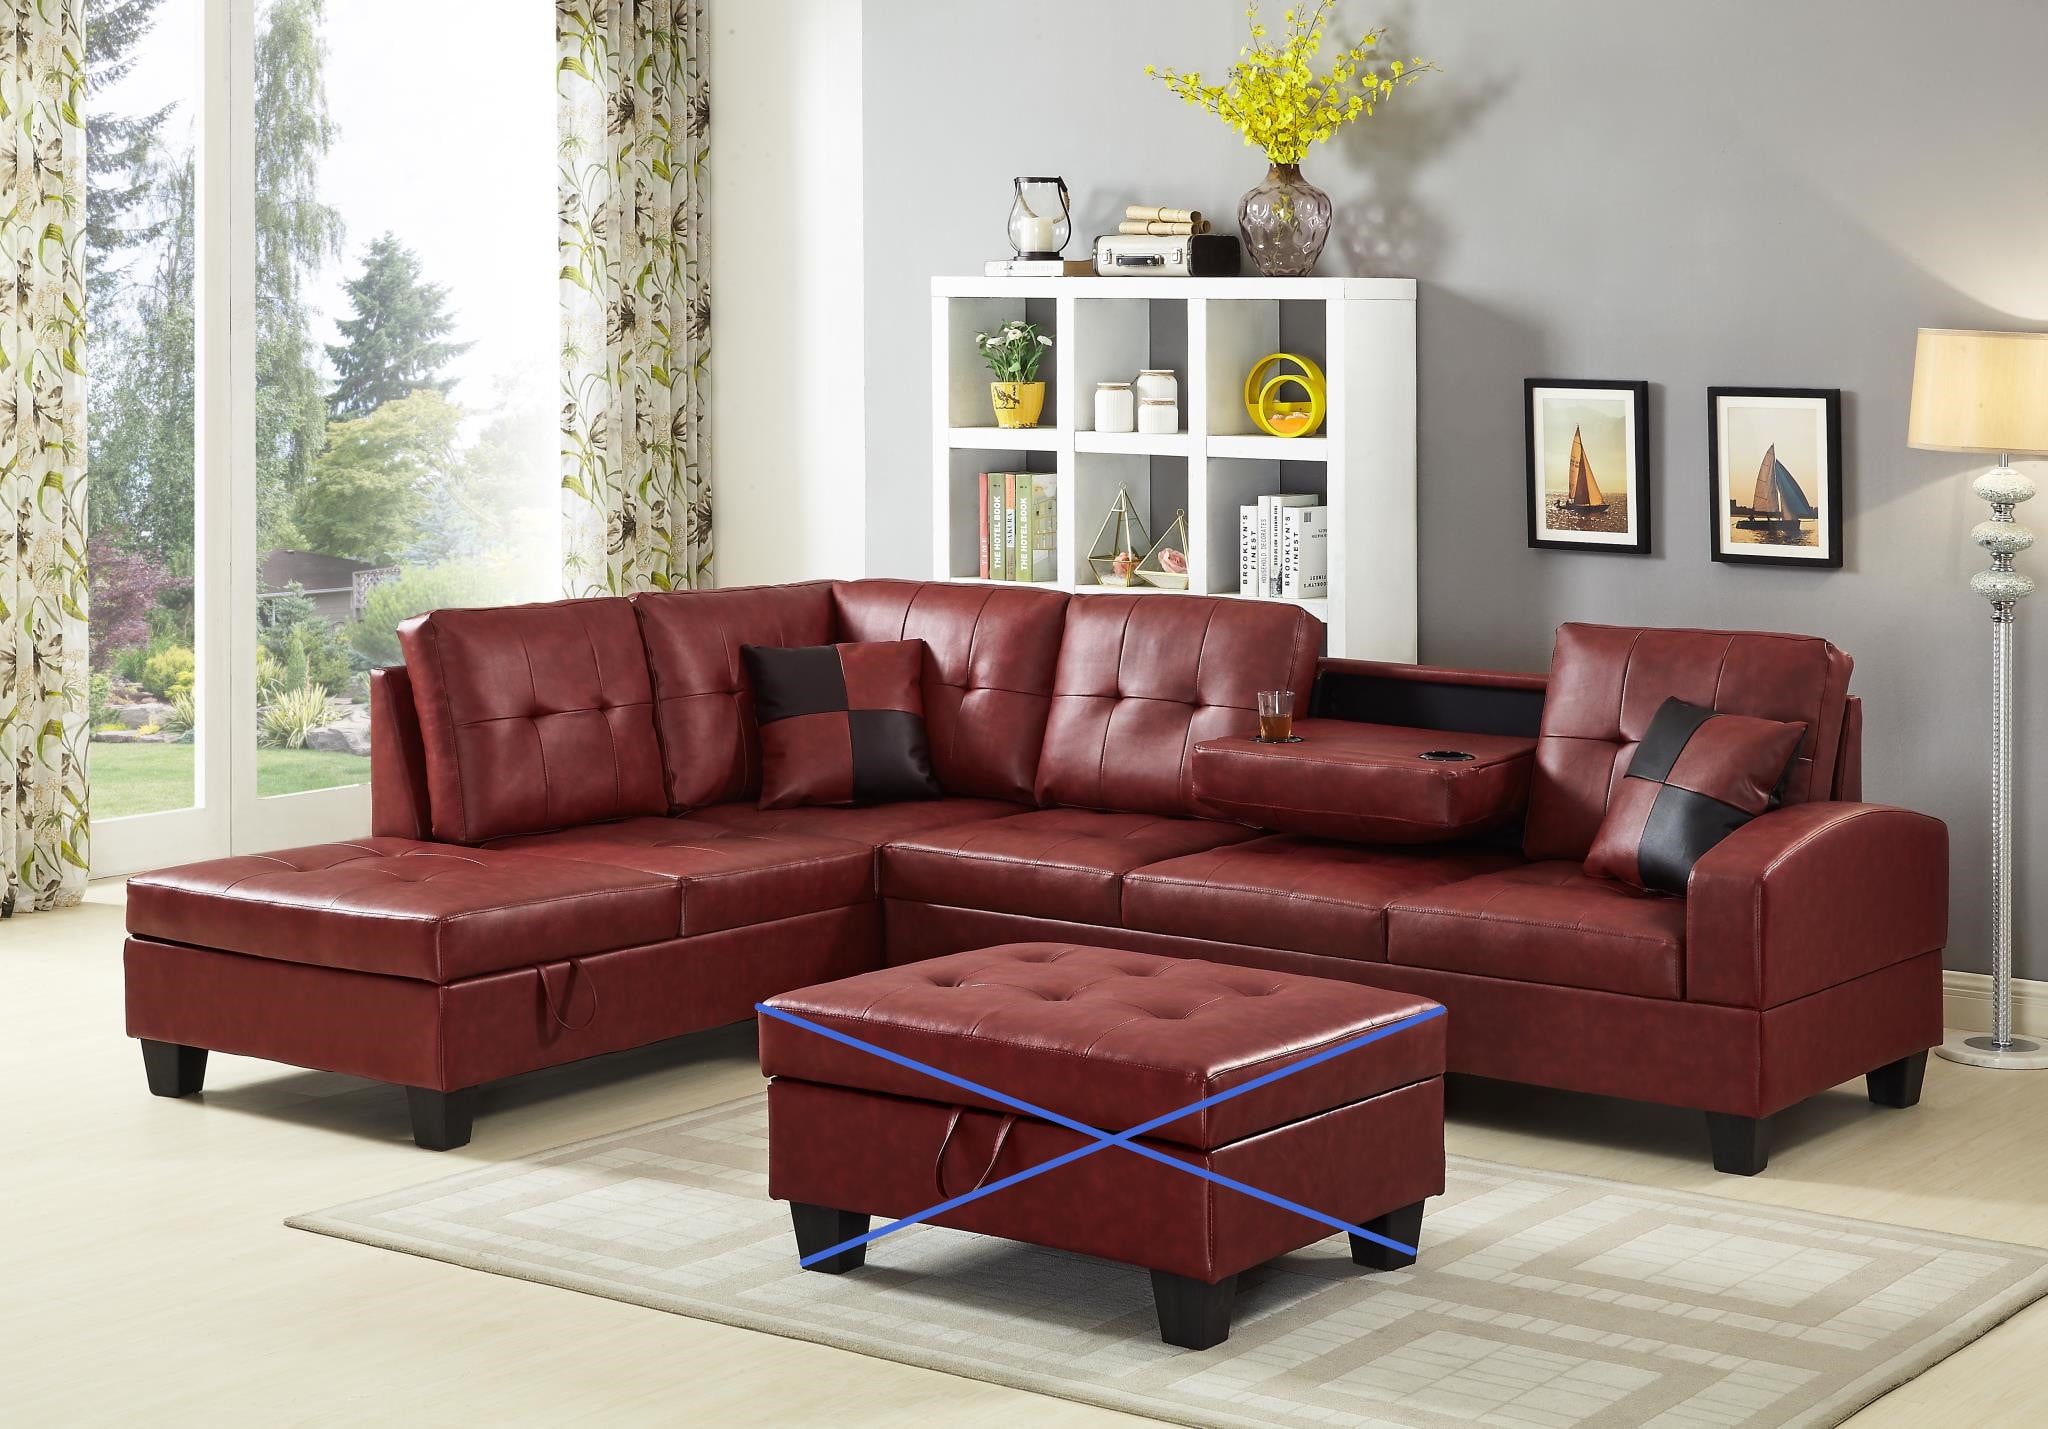 Gtu Furniture Pu Leather Living Room Irreversible Living Room Sectional Within Sofas For Living Rooms (View 14 of 20)